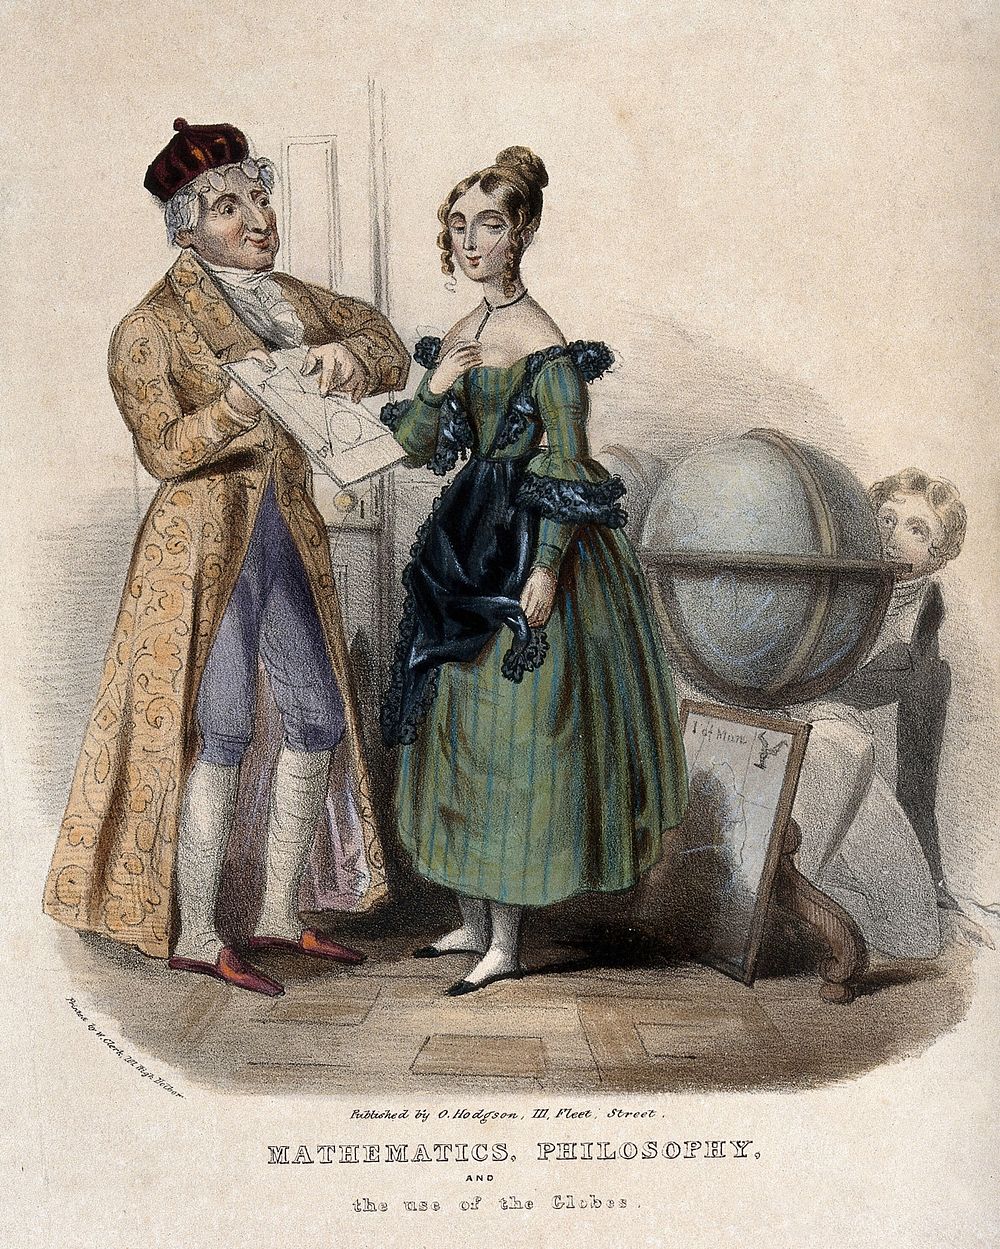 A middle-aged man giving a geometry lesson to young woman, a young man [her suitor] hides behind a large globe. Coloured…